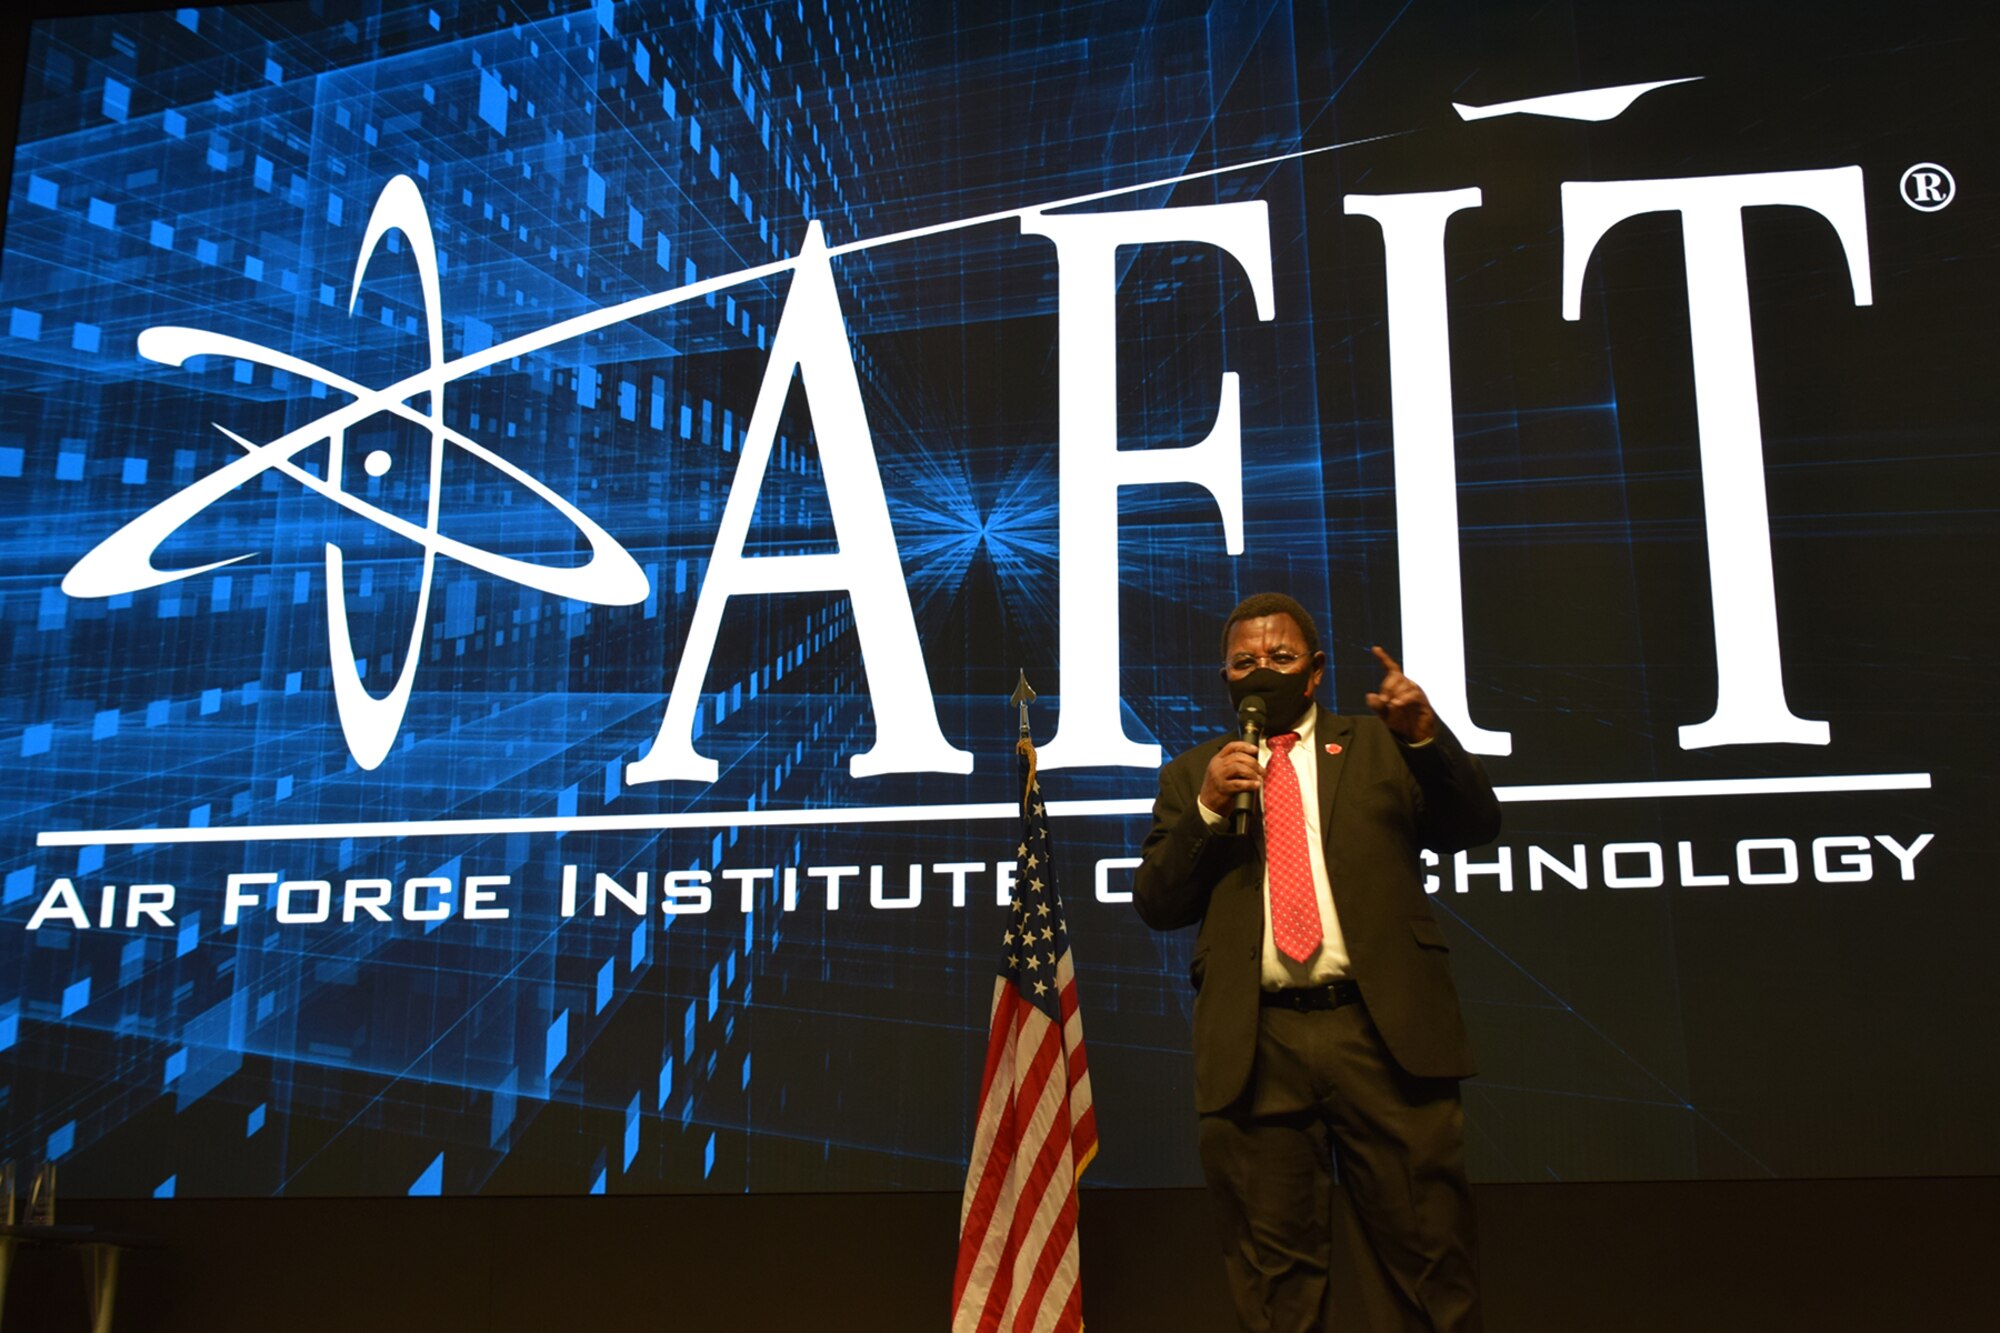 Dr. Adedeji Badiru, dean of the Air Force Institute of Technology’s Graduate School of Engineering and Management presented the school’s annual awards honoring faculty and staff for outstanding performance on January 22. (U.S. Air Force Photo/Katie Scott)